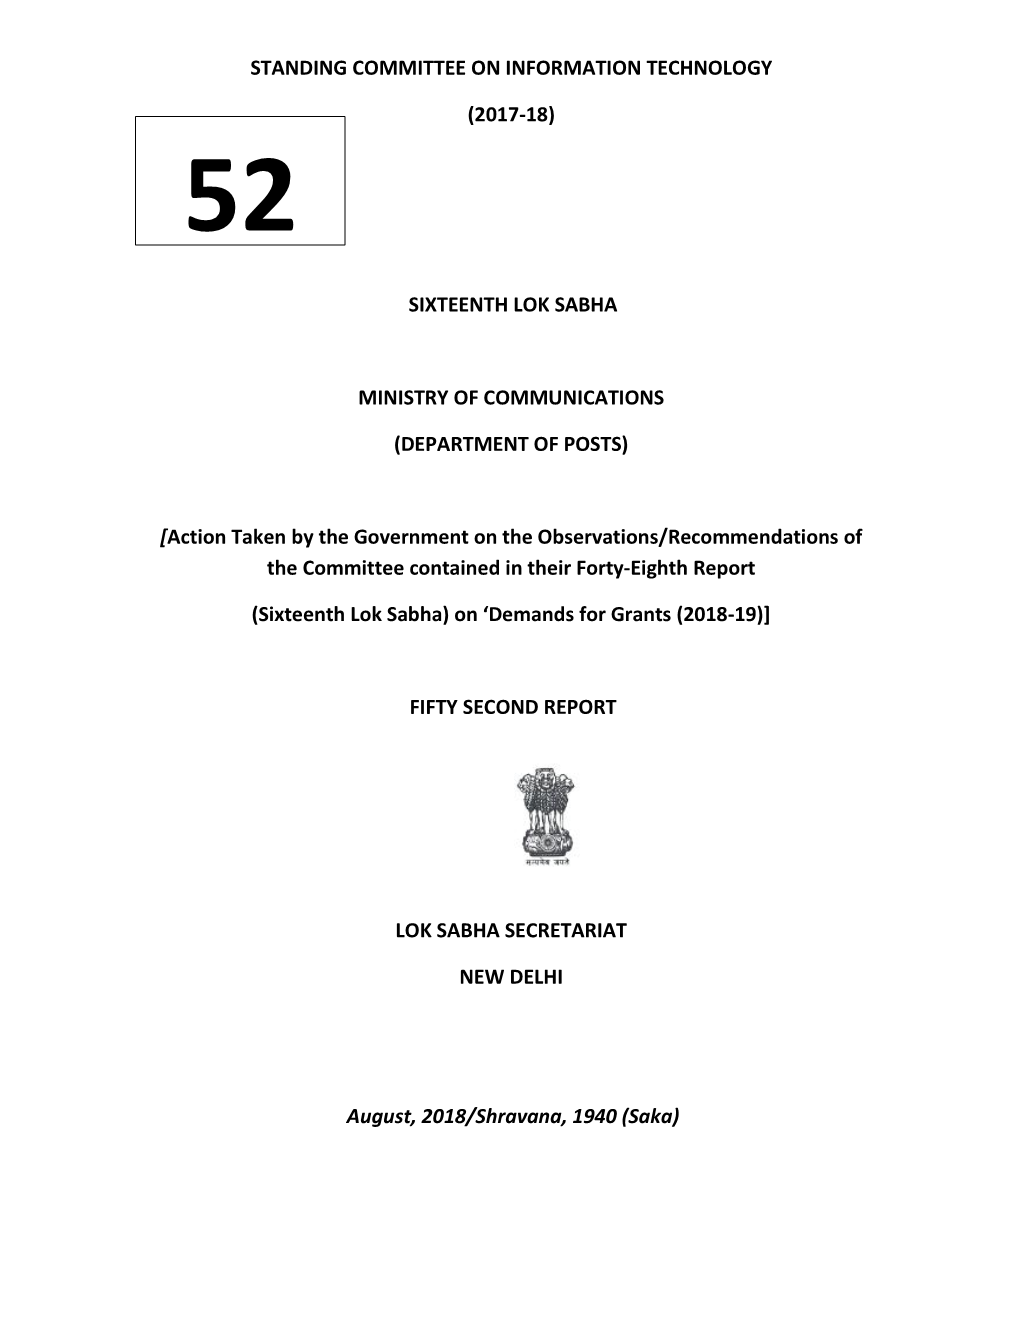 STANDING COMMITTEE on INFORMATION TECHNOLOGY (2017-18) SIXTEENTH LOK SABHA MINISTRY of COMMUNICATIONS (DEPARTMENT of POSTS) [Act